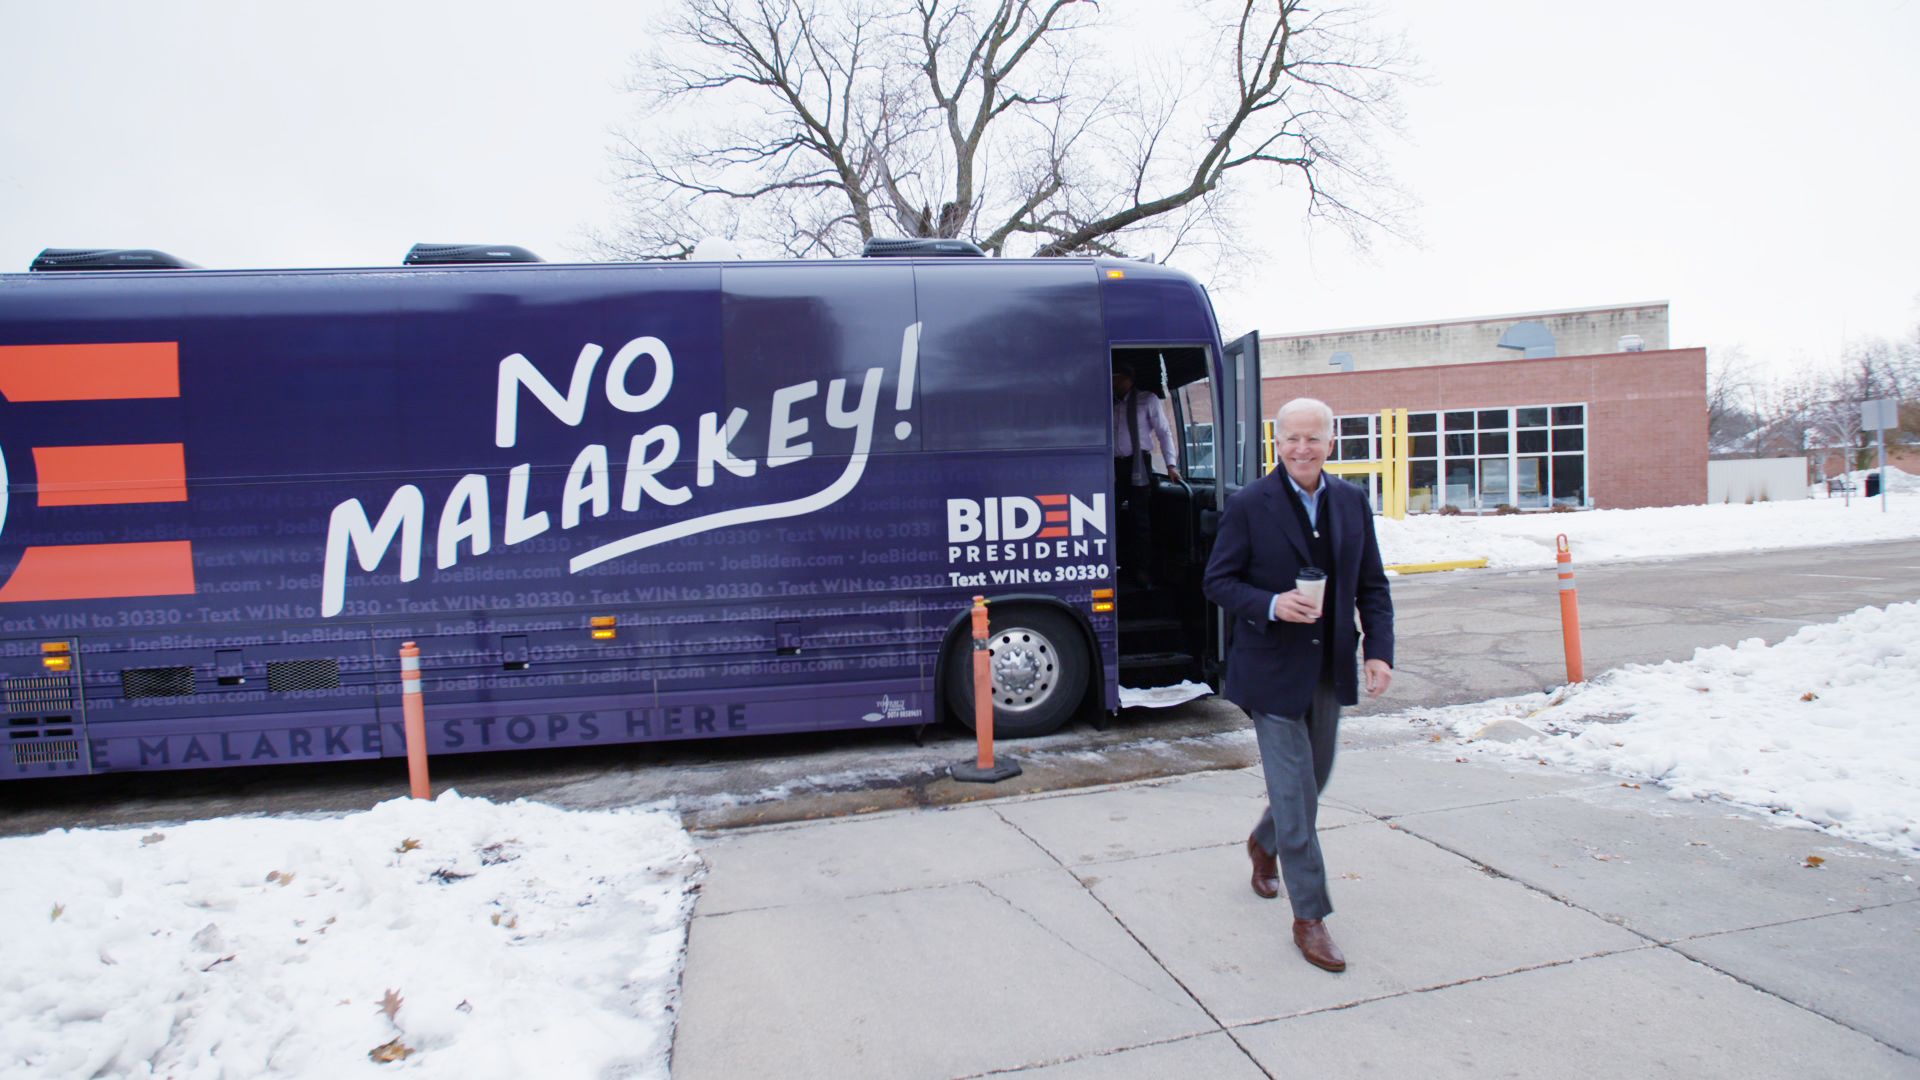 Joe Biden walks in front of a bus with No Malarkey painted on the side